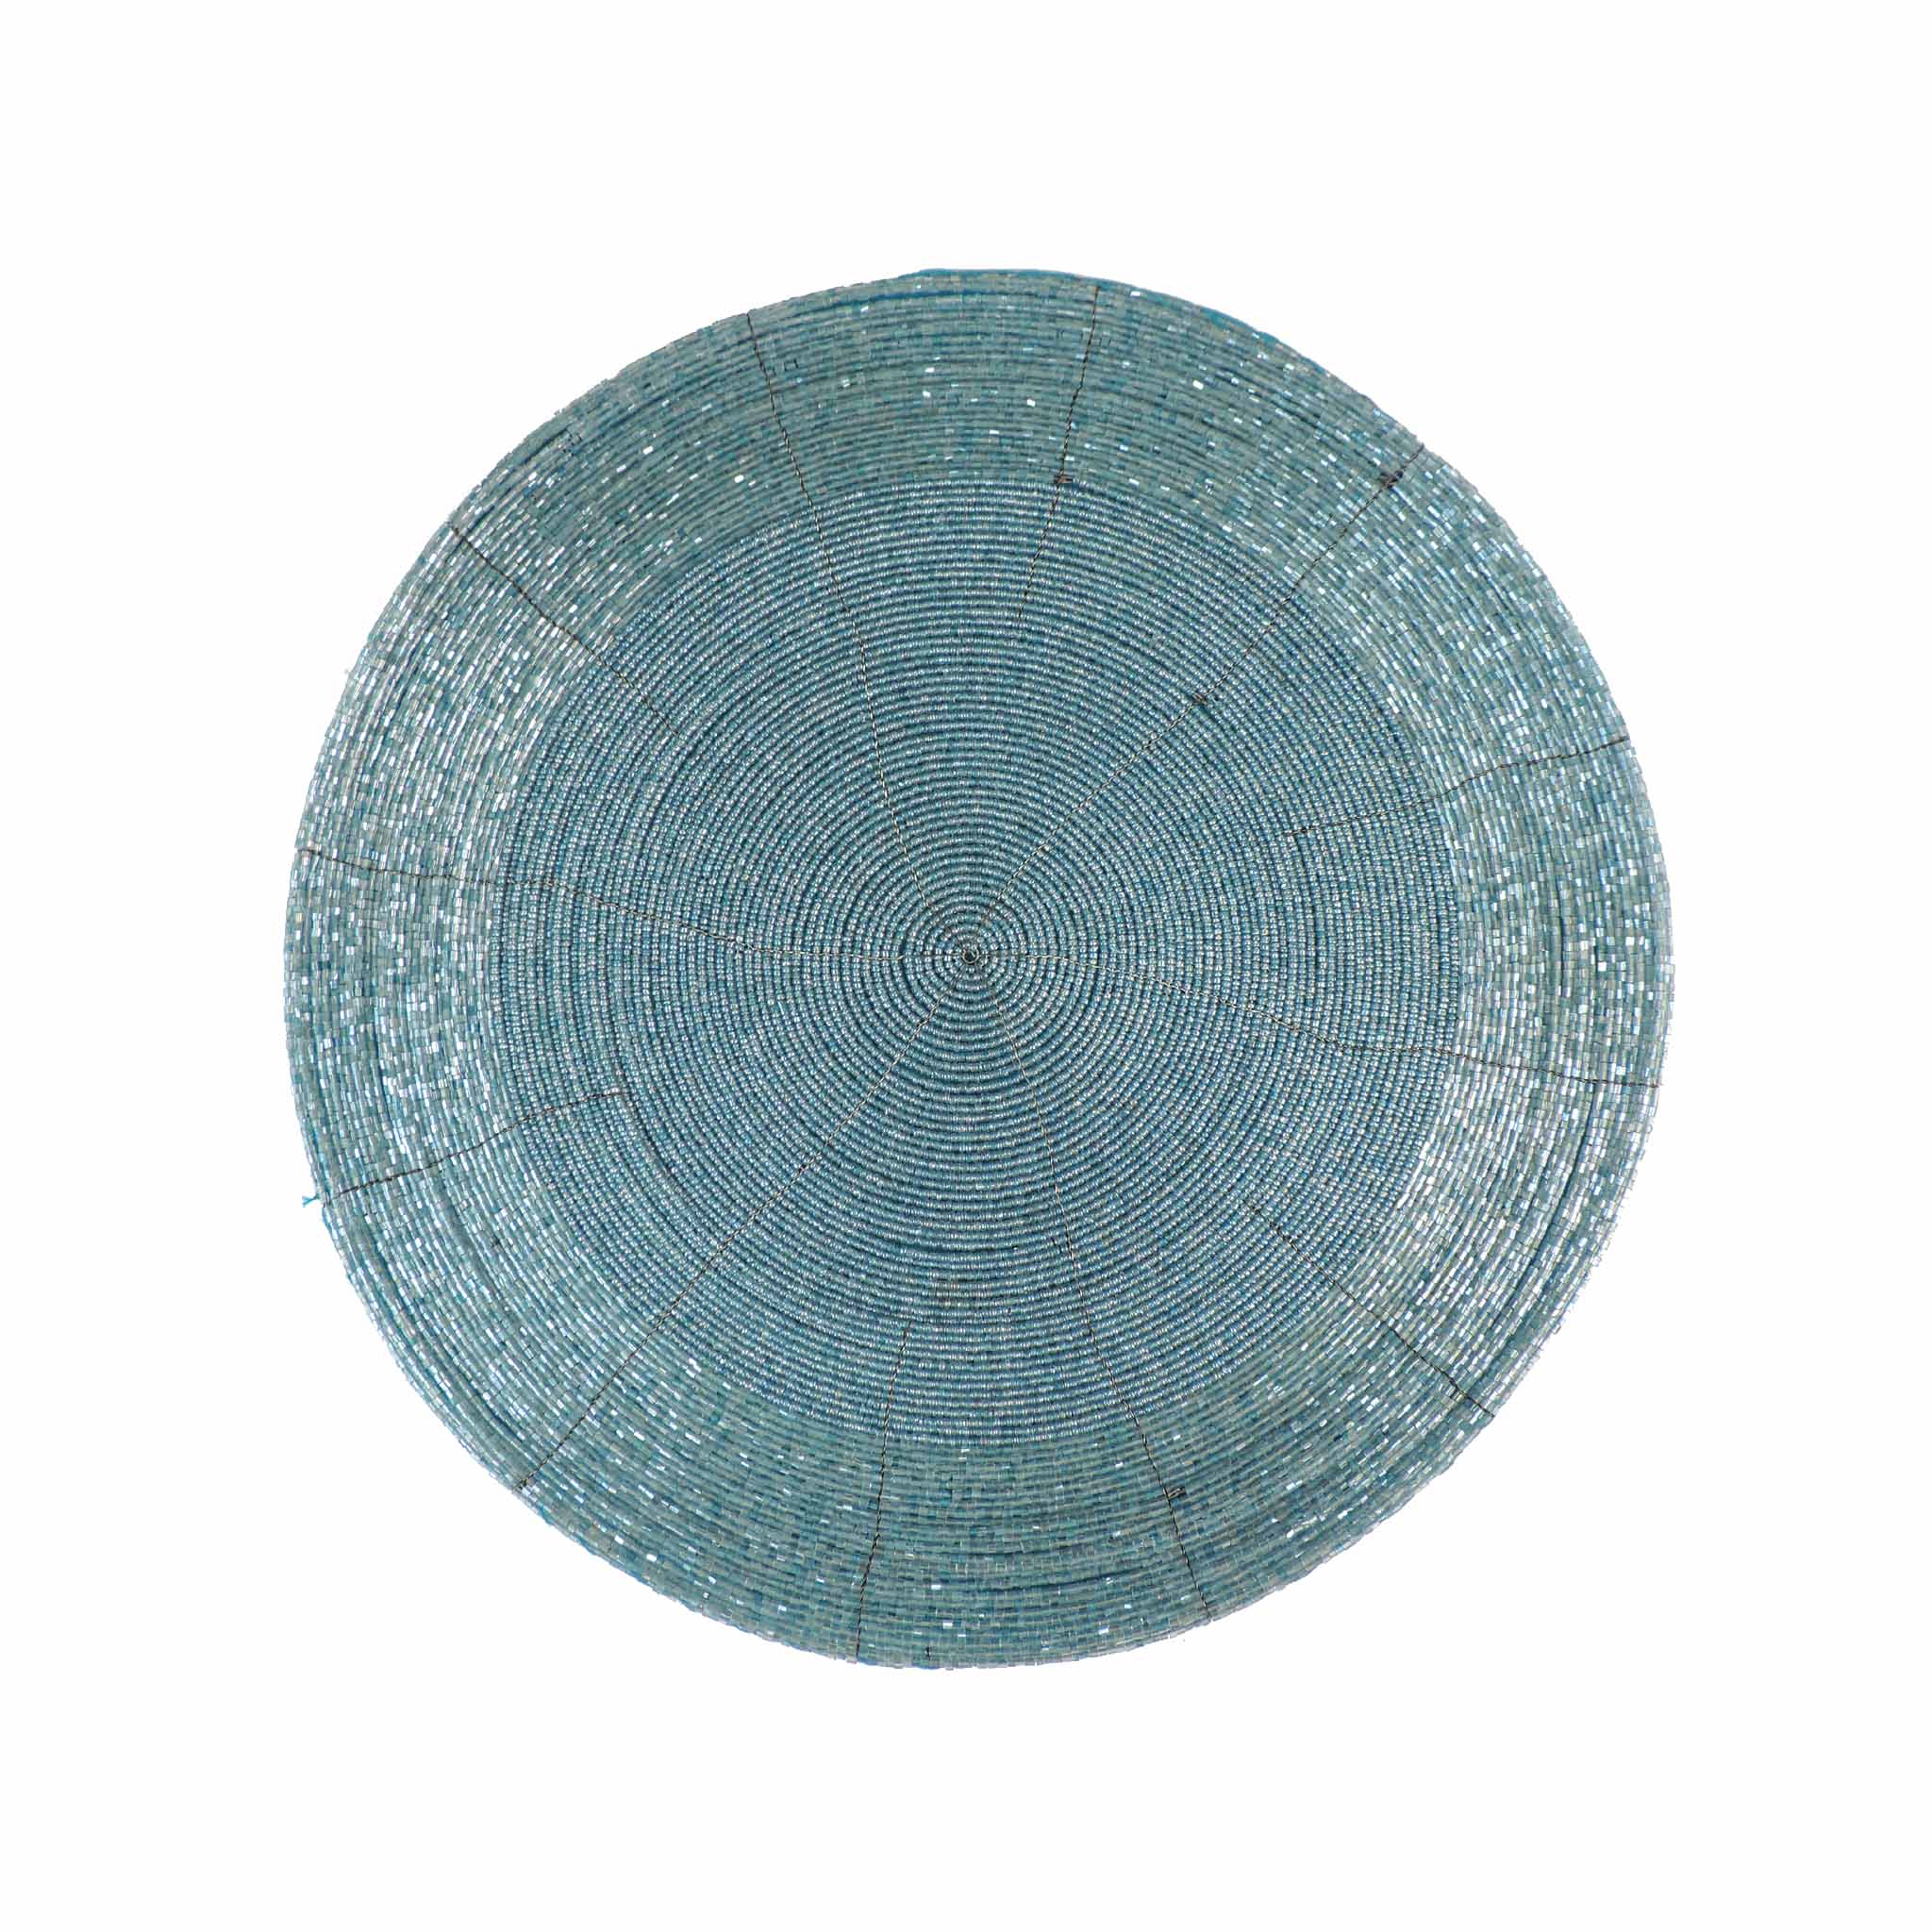 Glass Beaded  Placemat<br>Color: Ice Blue Two-Tone<br>Size: 13" Round<br>Set of 4 - Trunkin' USA